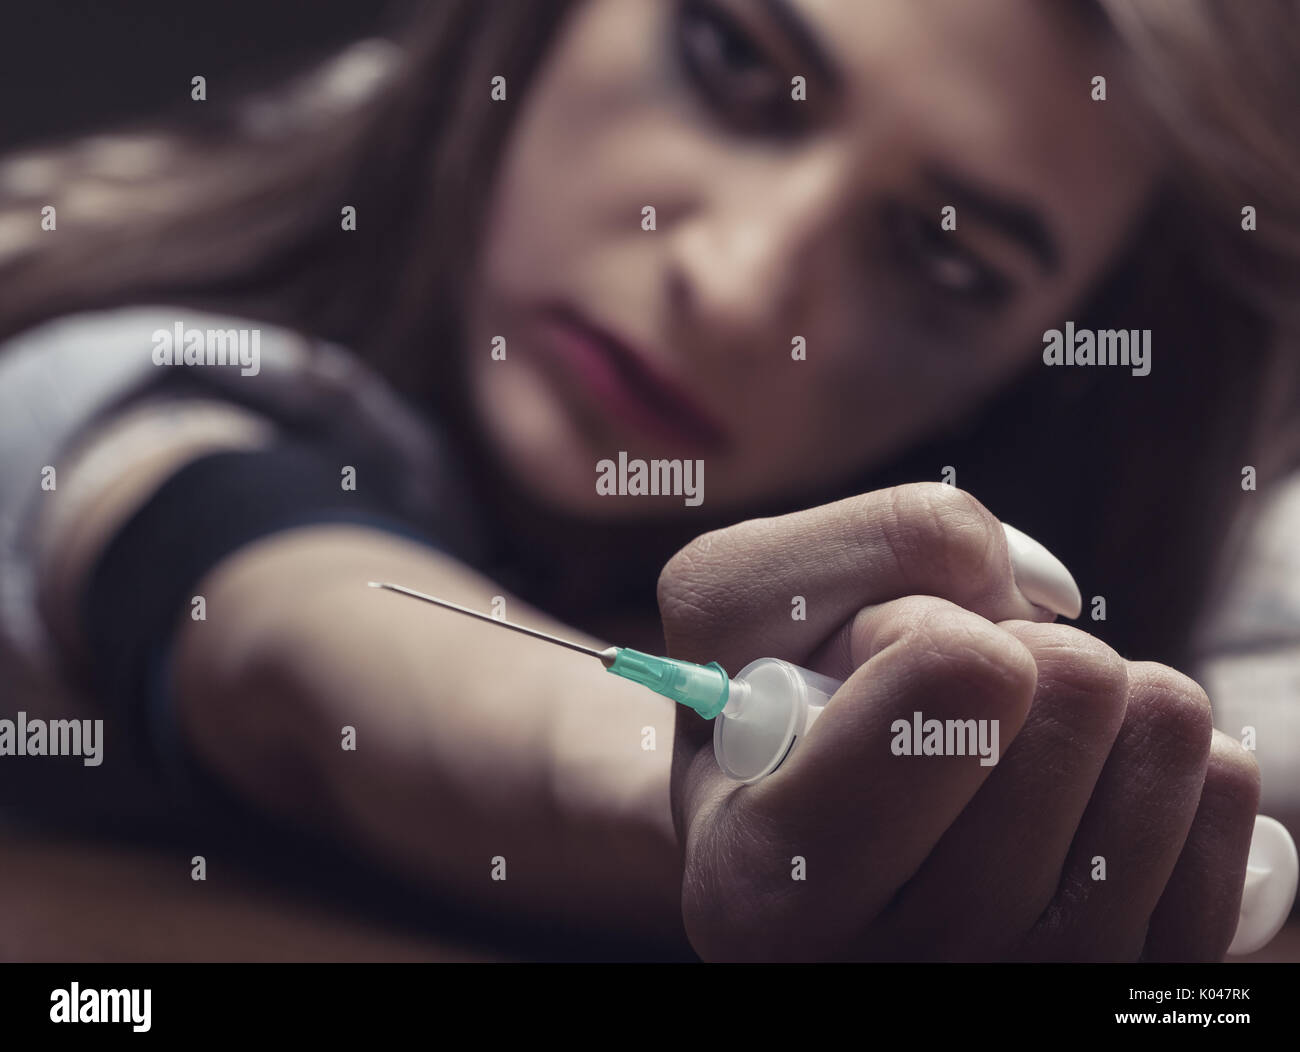 A young woman with a drug holding a syringe on dark background. Focus on hands Stock Photo